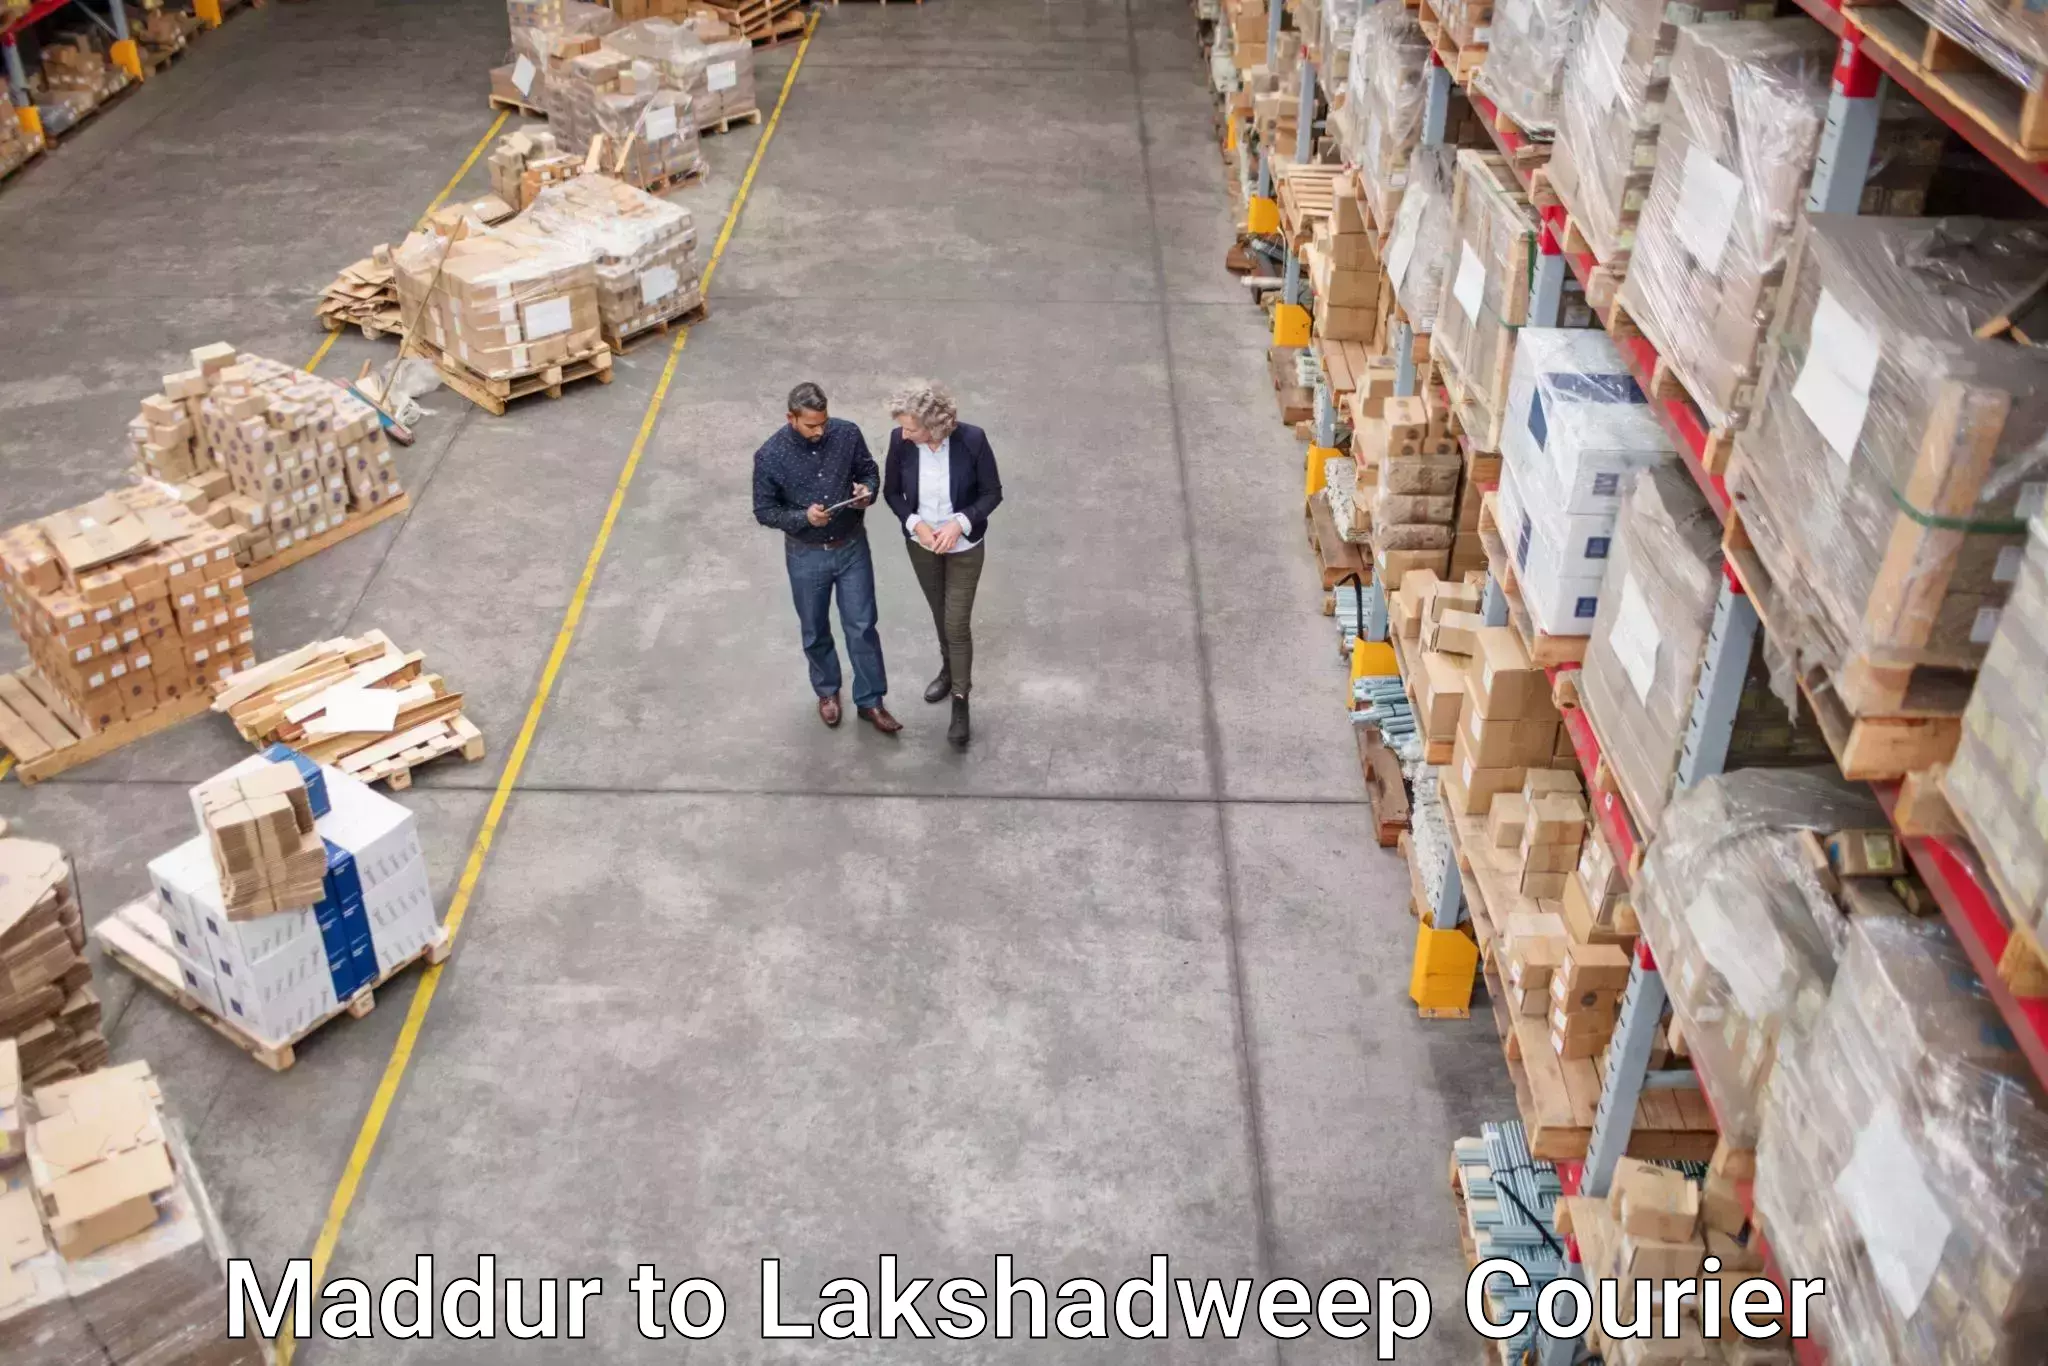 Global shipping networks in Maddur to Lakshadweep